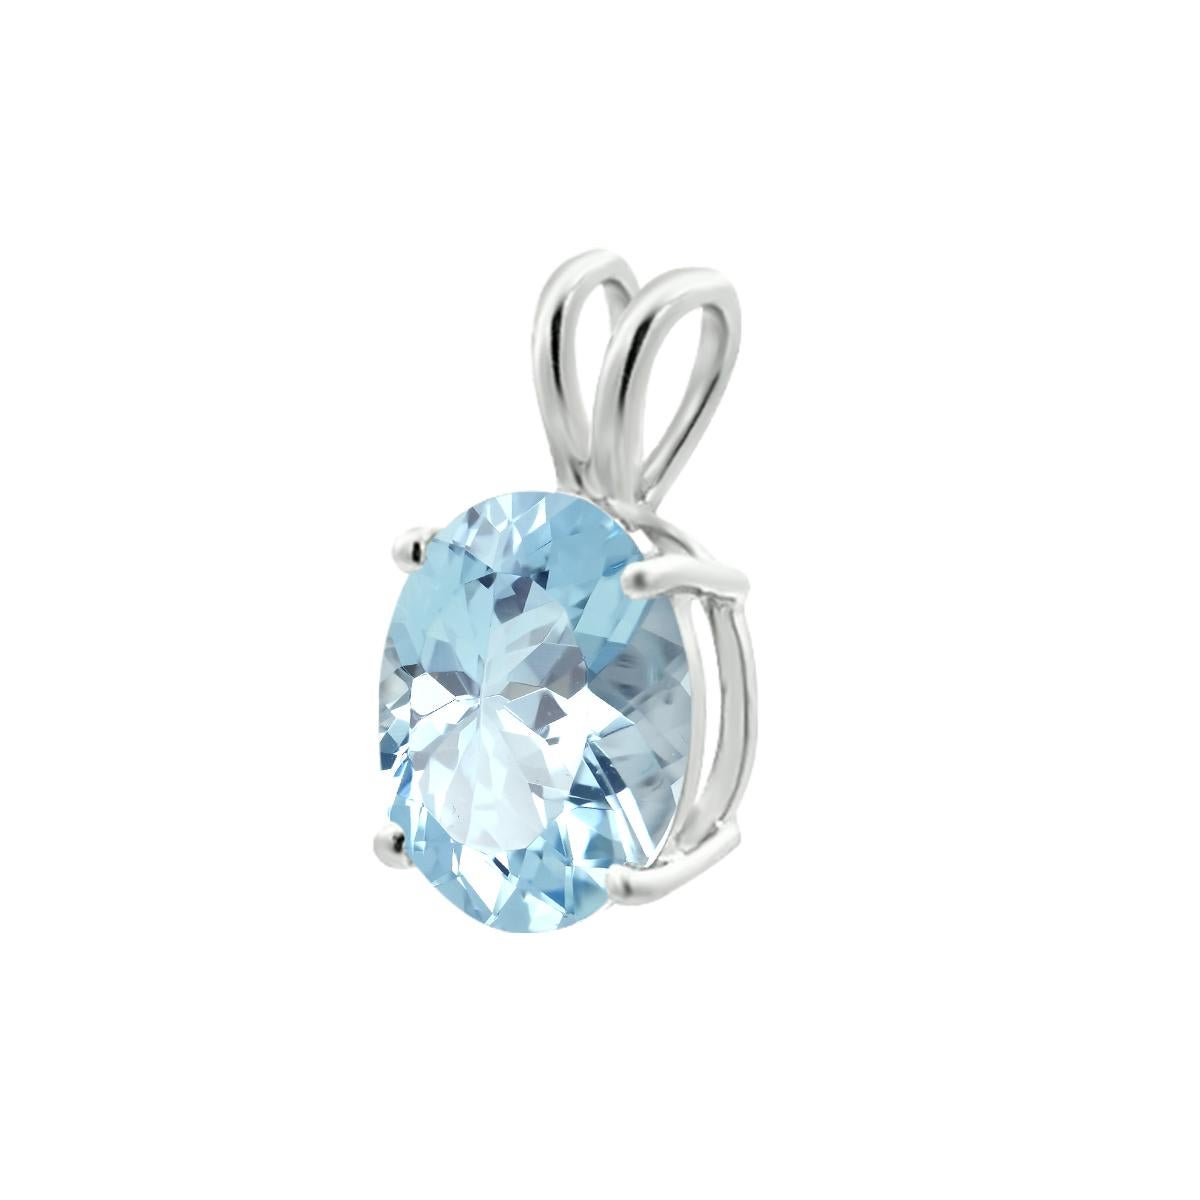 A Pretty Pendant Provides A Spark Of Cool Color And An Excess Of Elegance. 
This Pendant Features A Beautiful Oval Shaped 10x8mm Aquamarine Gemstone In A Very Fine Quality. 
The Aquamarine Gemstone Is Prong Set In 18K White Gold For This Design That